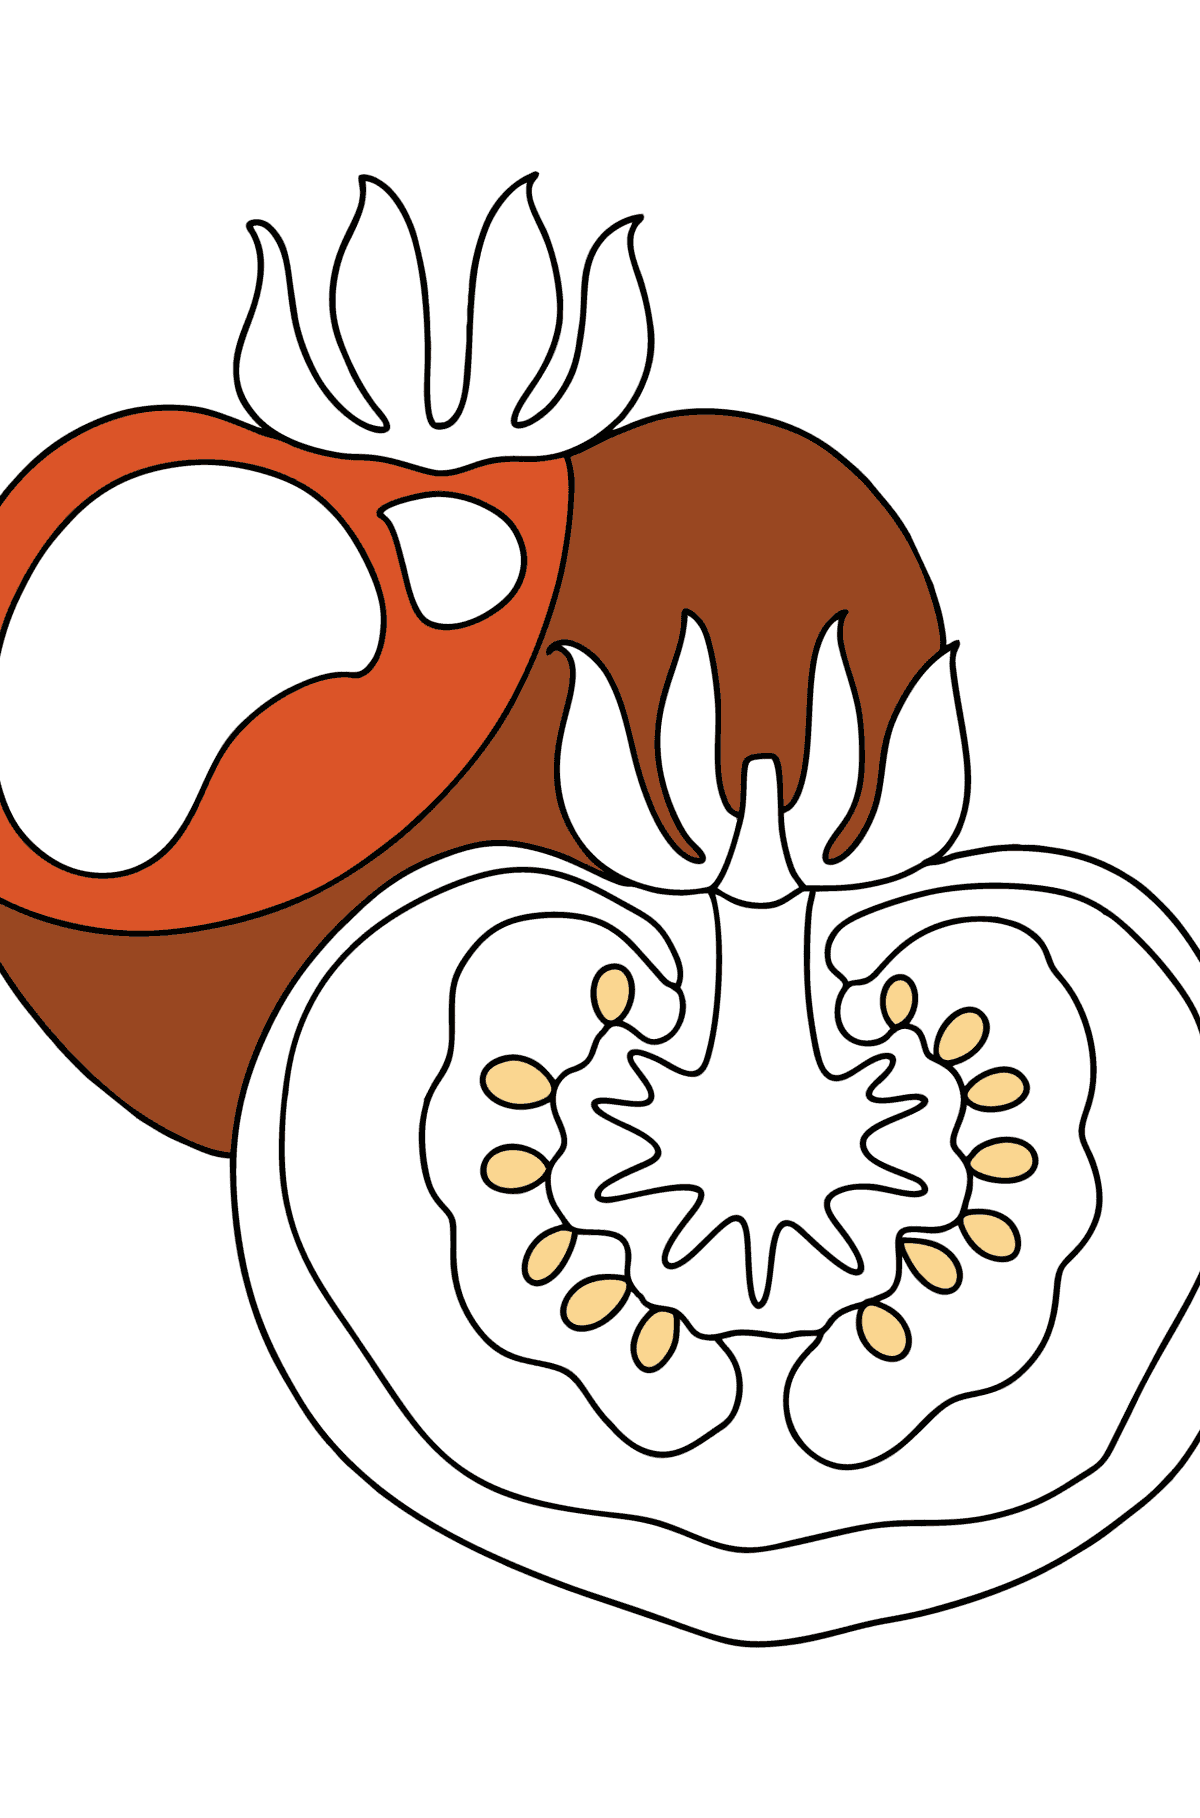 Ripe tomatoes сoloring page - Coloring Pages for Kids